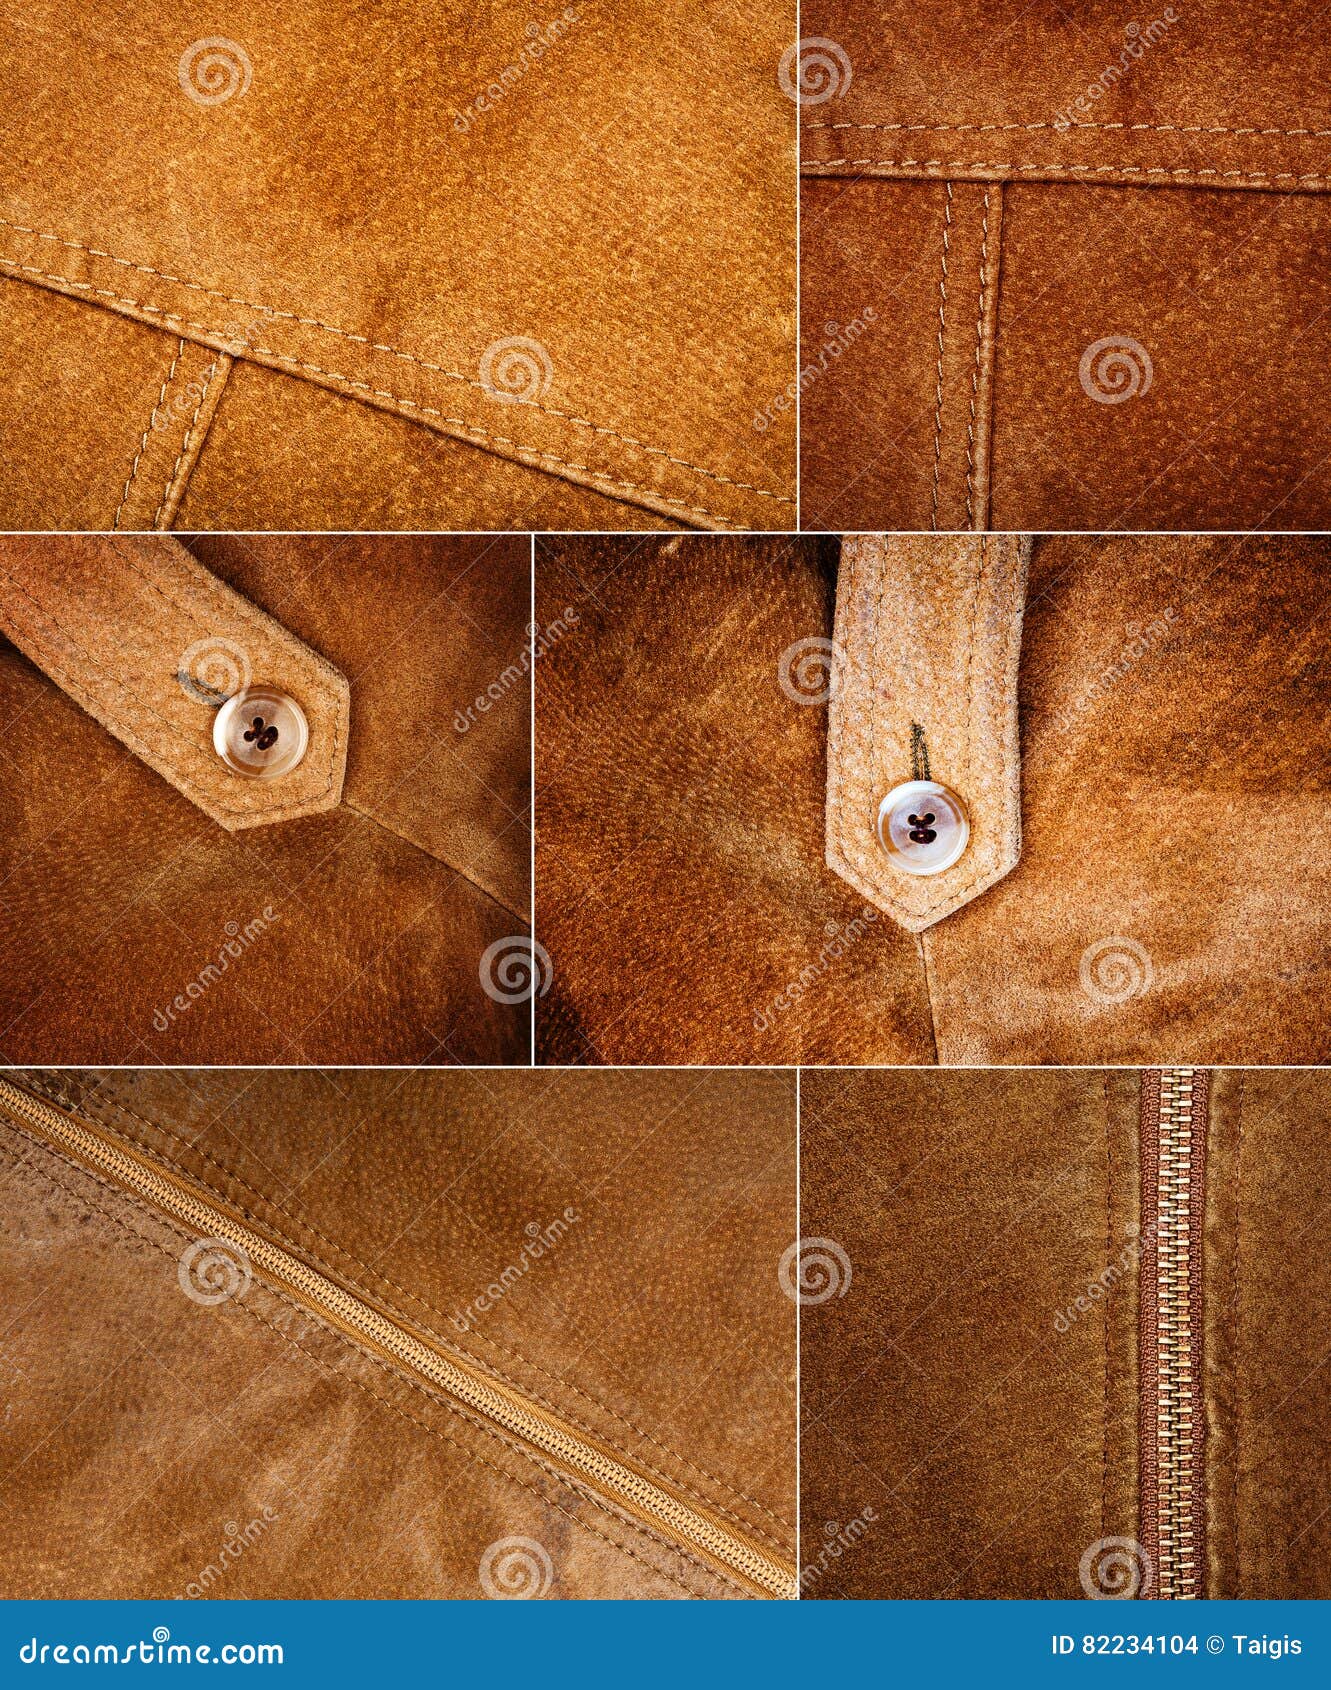 Collection of Various Suede Textures Stock Photo - Image of seam, cloth ...